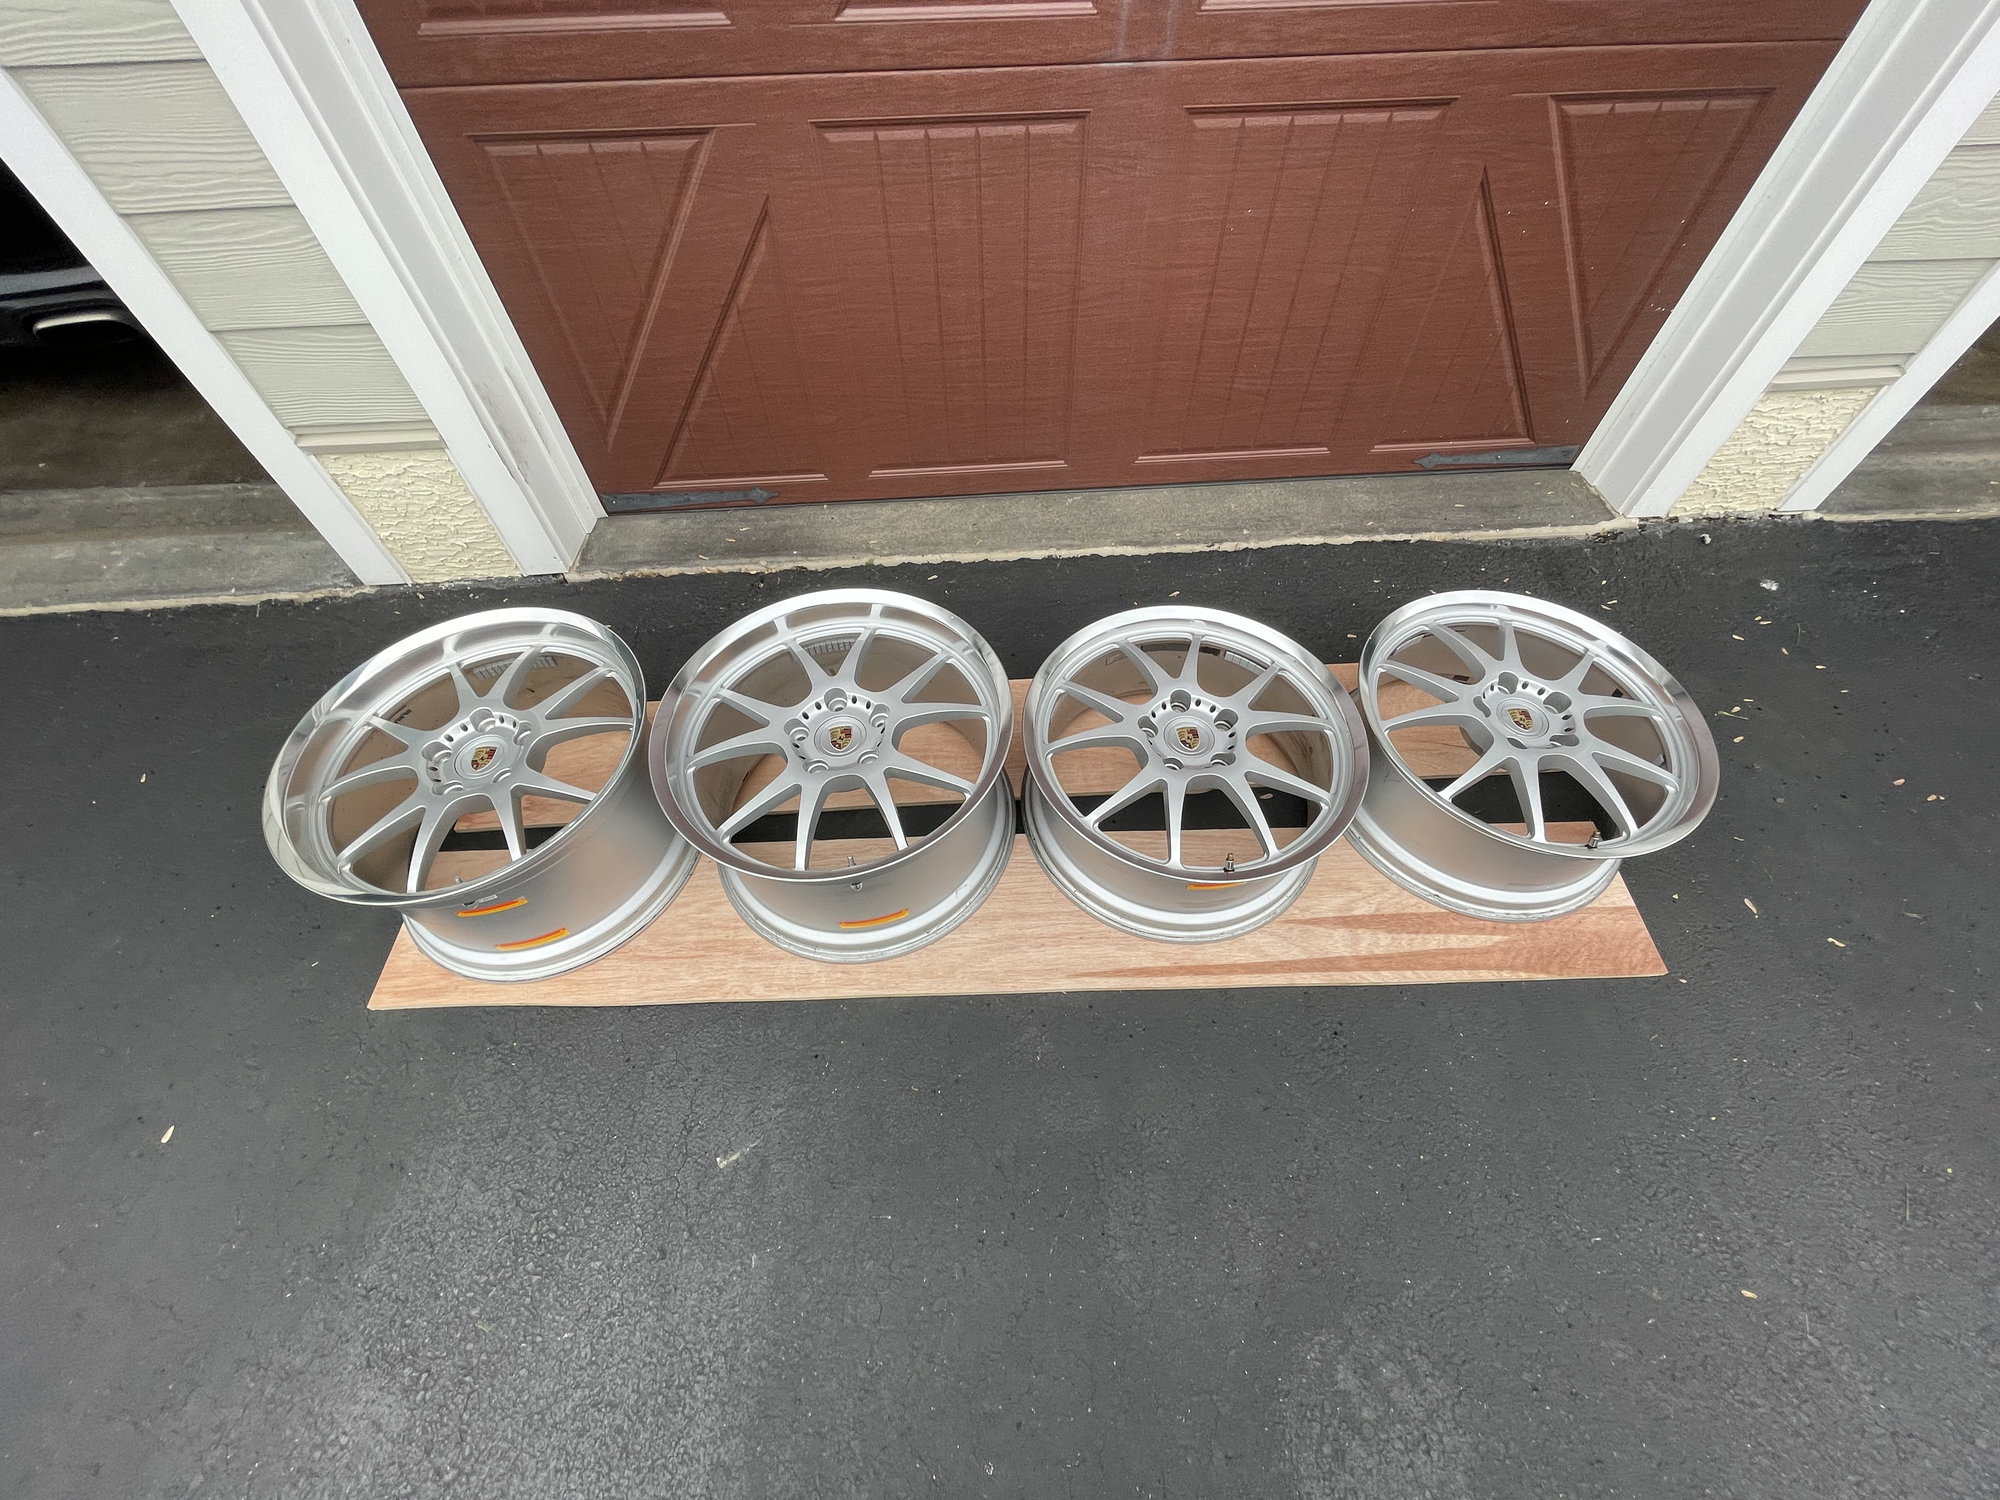 Wheels and Tires/Axles - FS: Champion RS98 Lightweight Wheels and Center Caps - Used - 1999 to 2021 Porsche All Models - 1999 to 2011 Porsche 911 - West Chester, PA 19380, United States